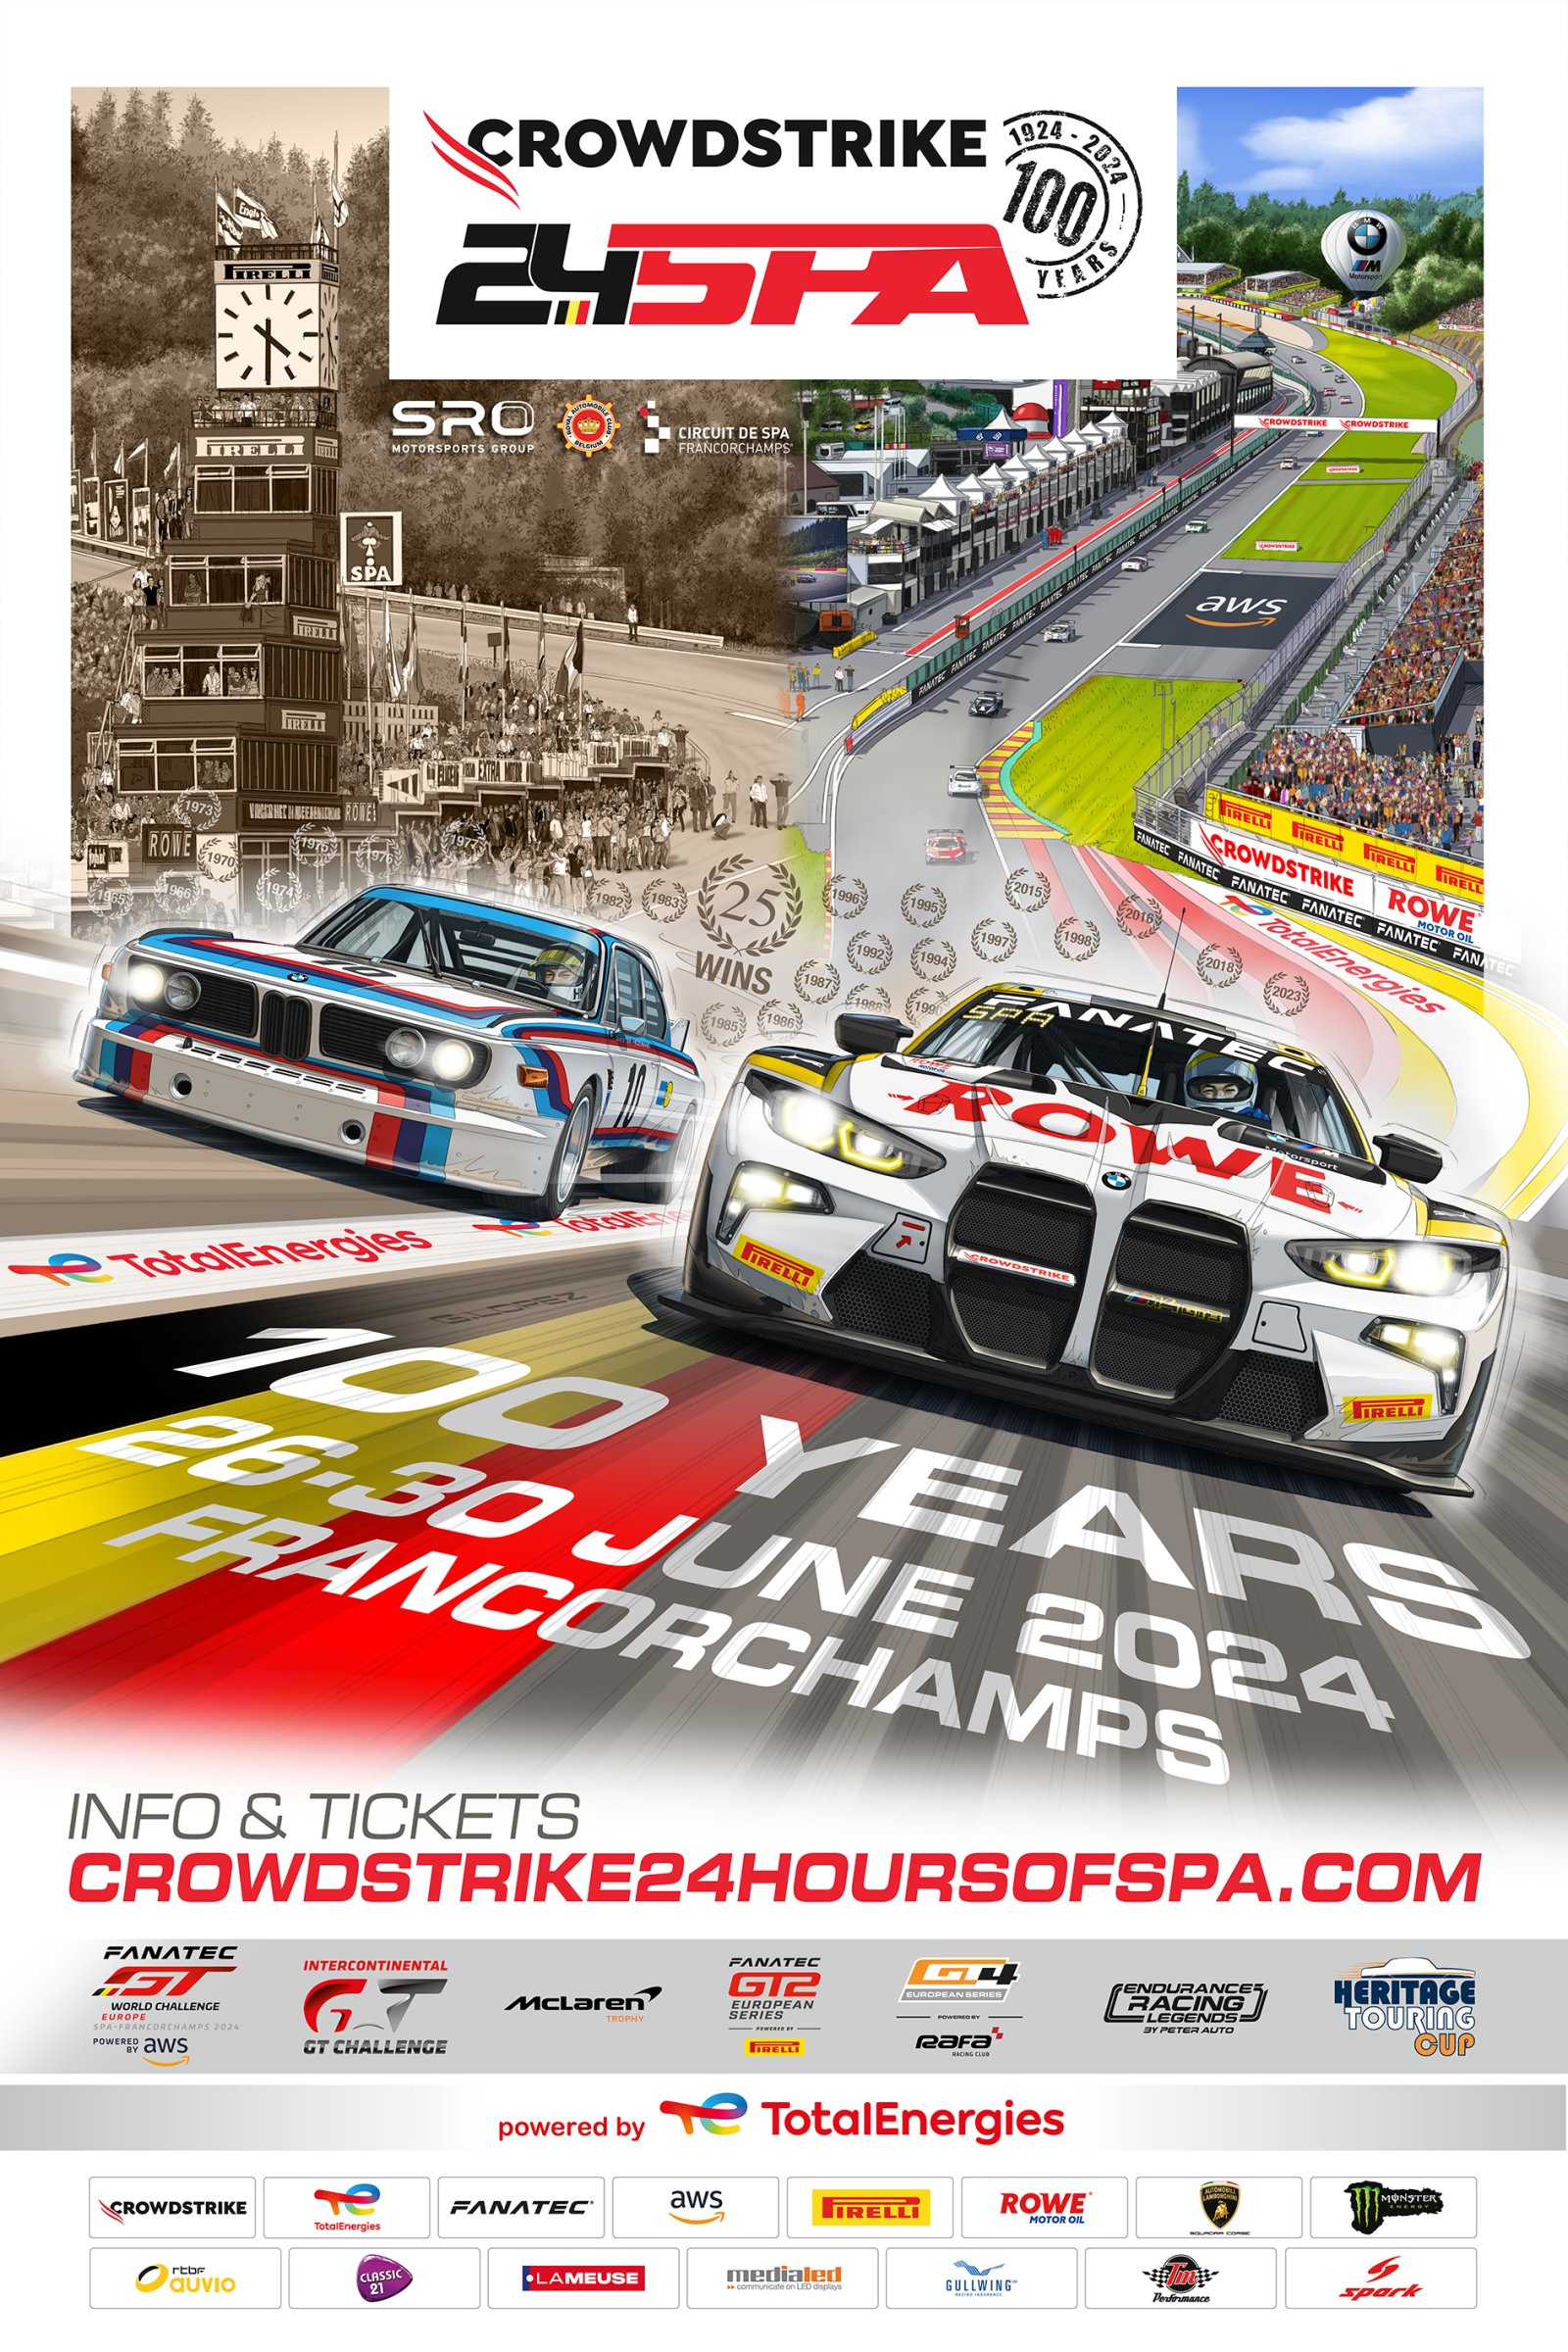 Poster 8/10: record-breaker BMW the brand to beat at centenary CrowdStrike 24 Hours of Spa